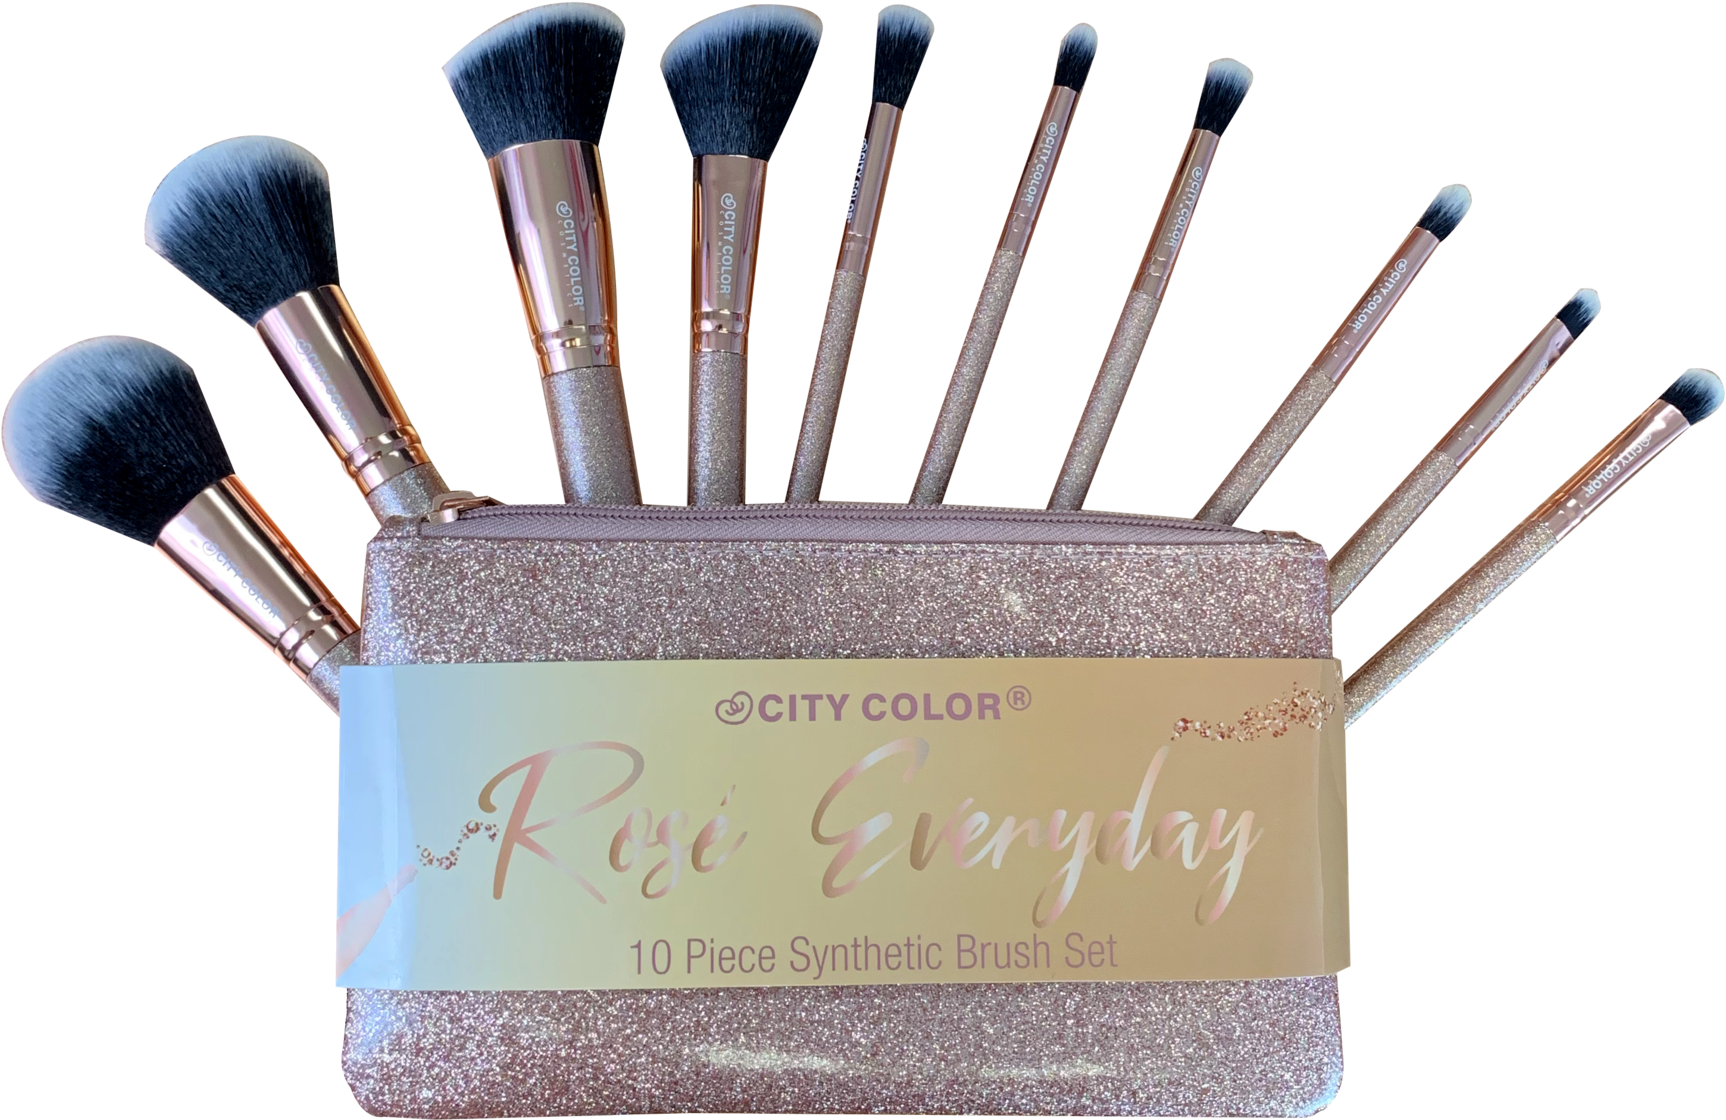 City Color10 Piece Synthetic Brush Set